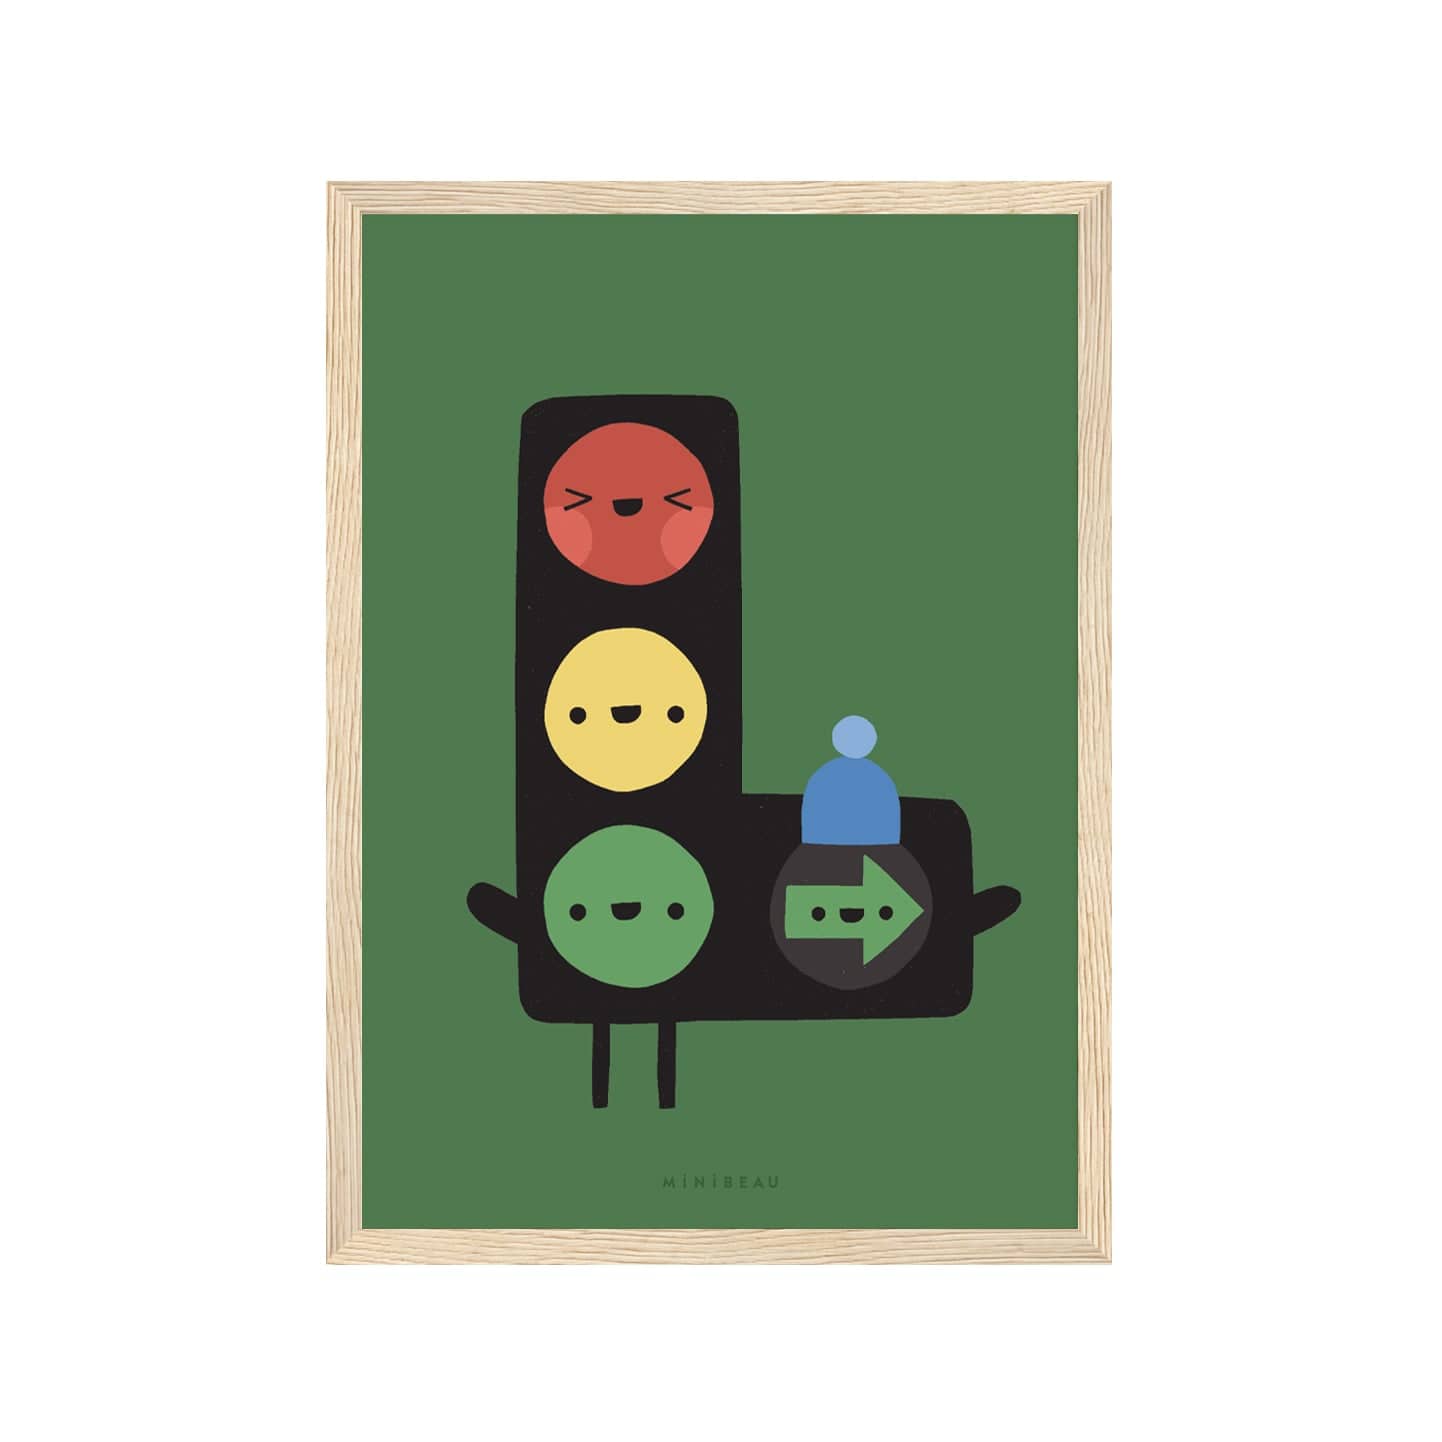 Art print in a light wood frame. Our Happy Alphabet 'L' Art Print shows filter traffic lights in the shape of an L with a smiling face in each light. The Green Arrow light is wearing a blue woolly hat. All on a dark green background.